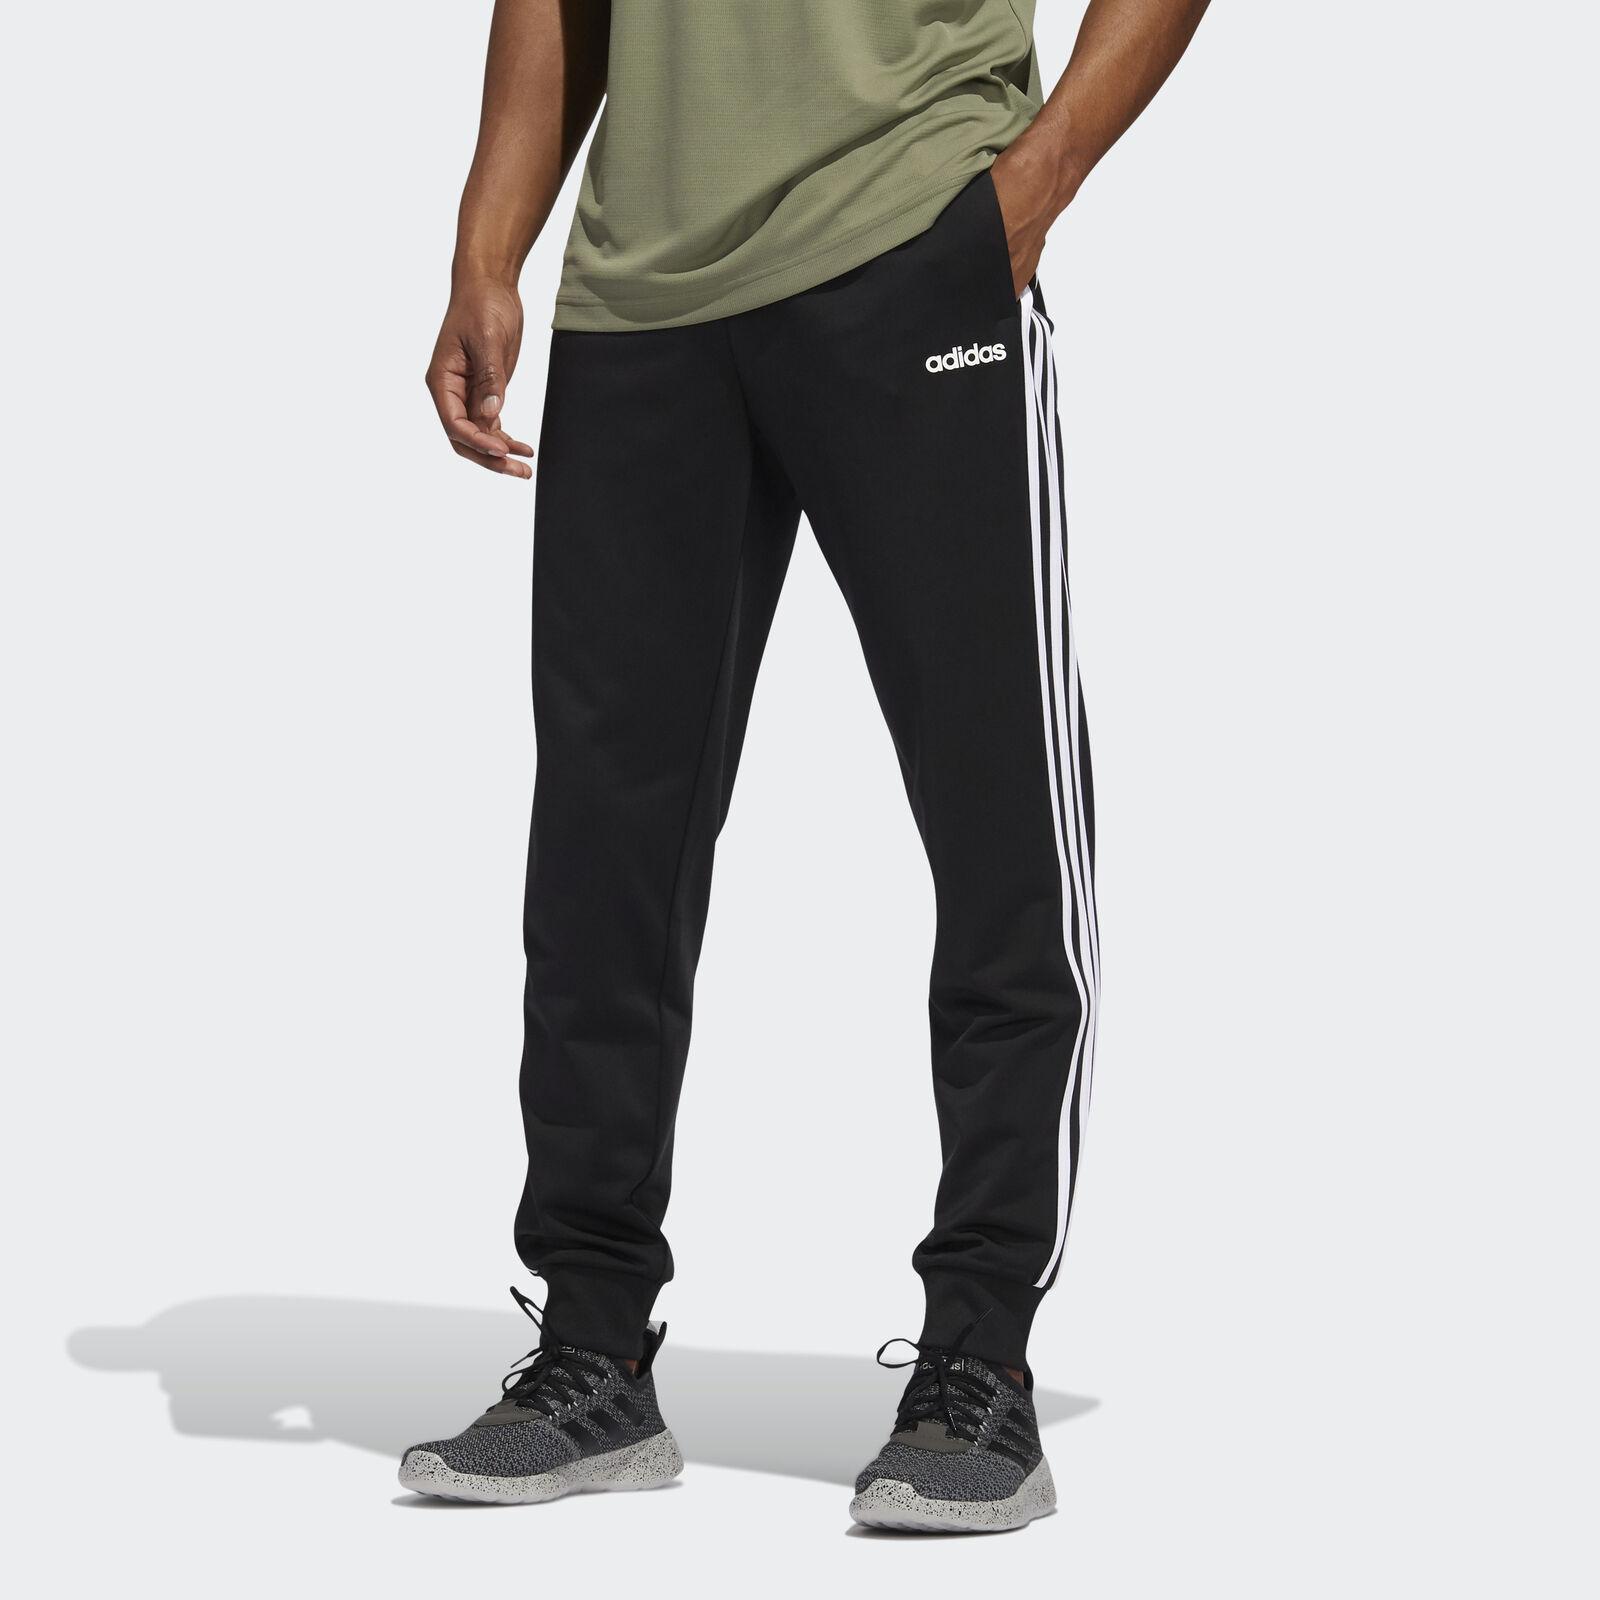 2 adidas Mens 3-Stripes Tricot Pants for $32.98 Shipped